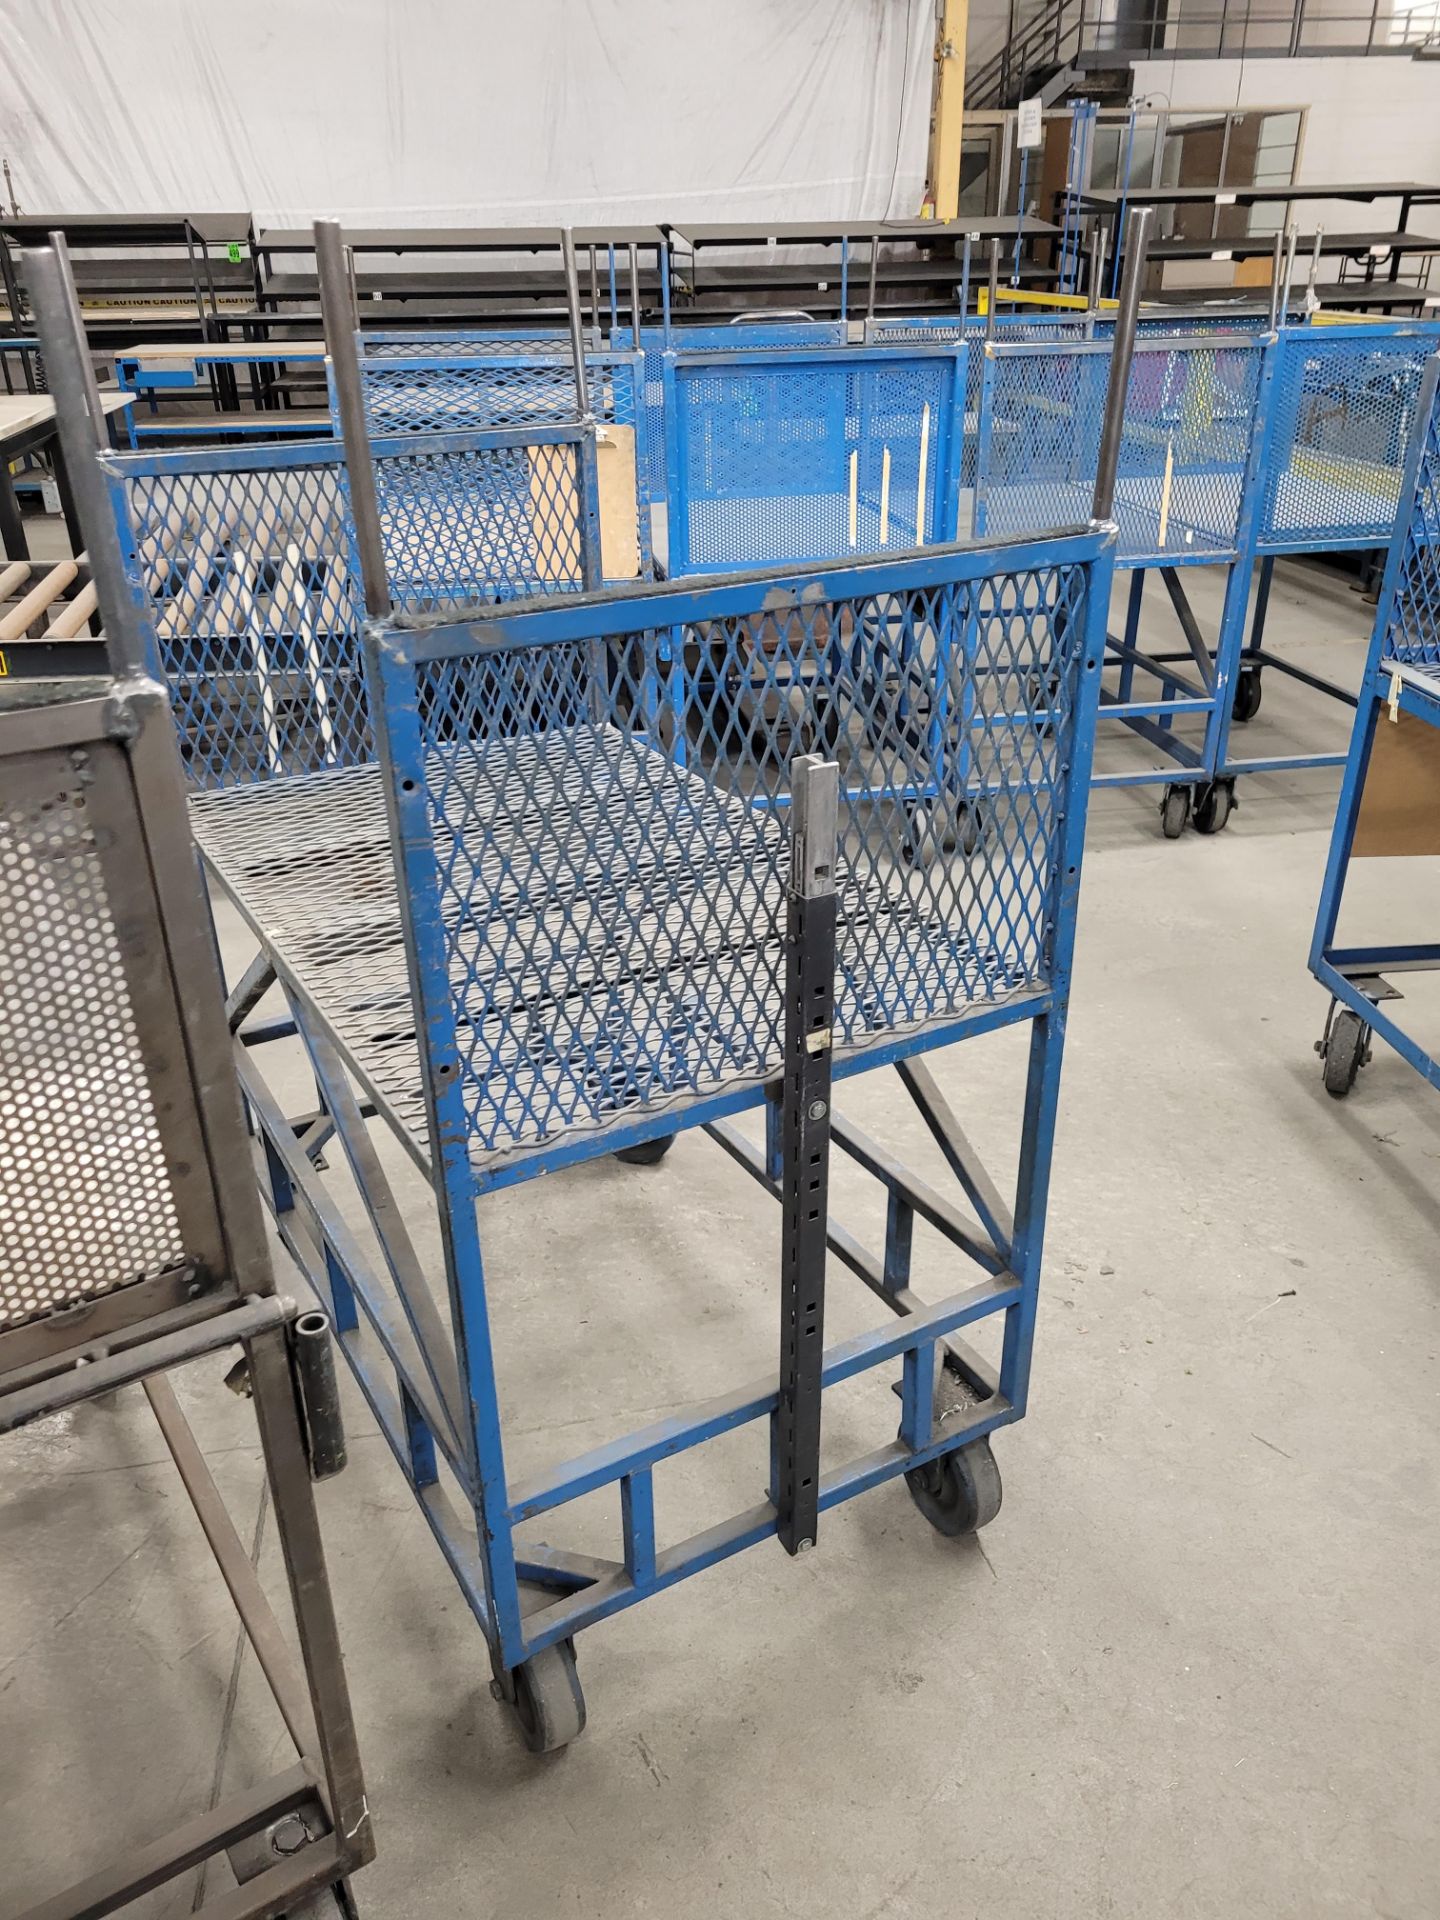 Lot of (3) steel-lattice carts w/handles, casters, wheel lock, (2) w/ expandable sides and floor loc - Image 4 of 4